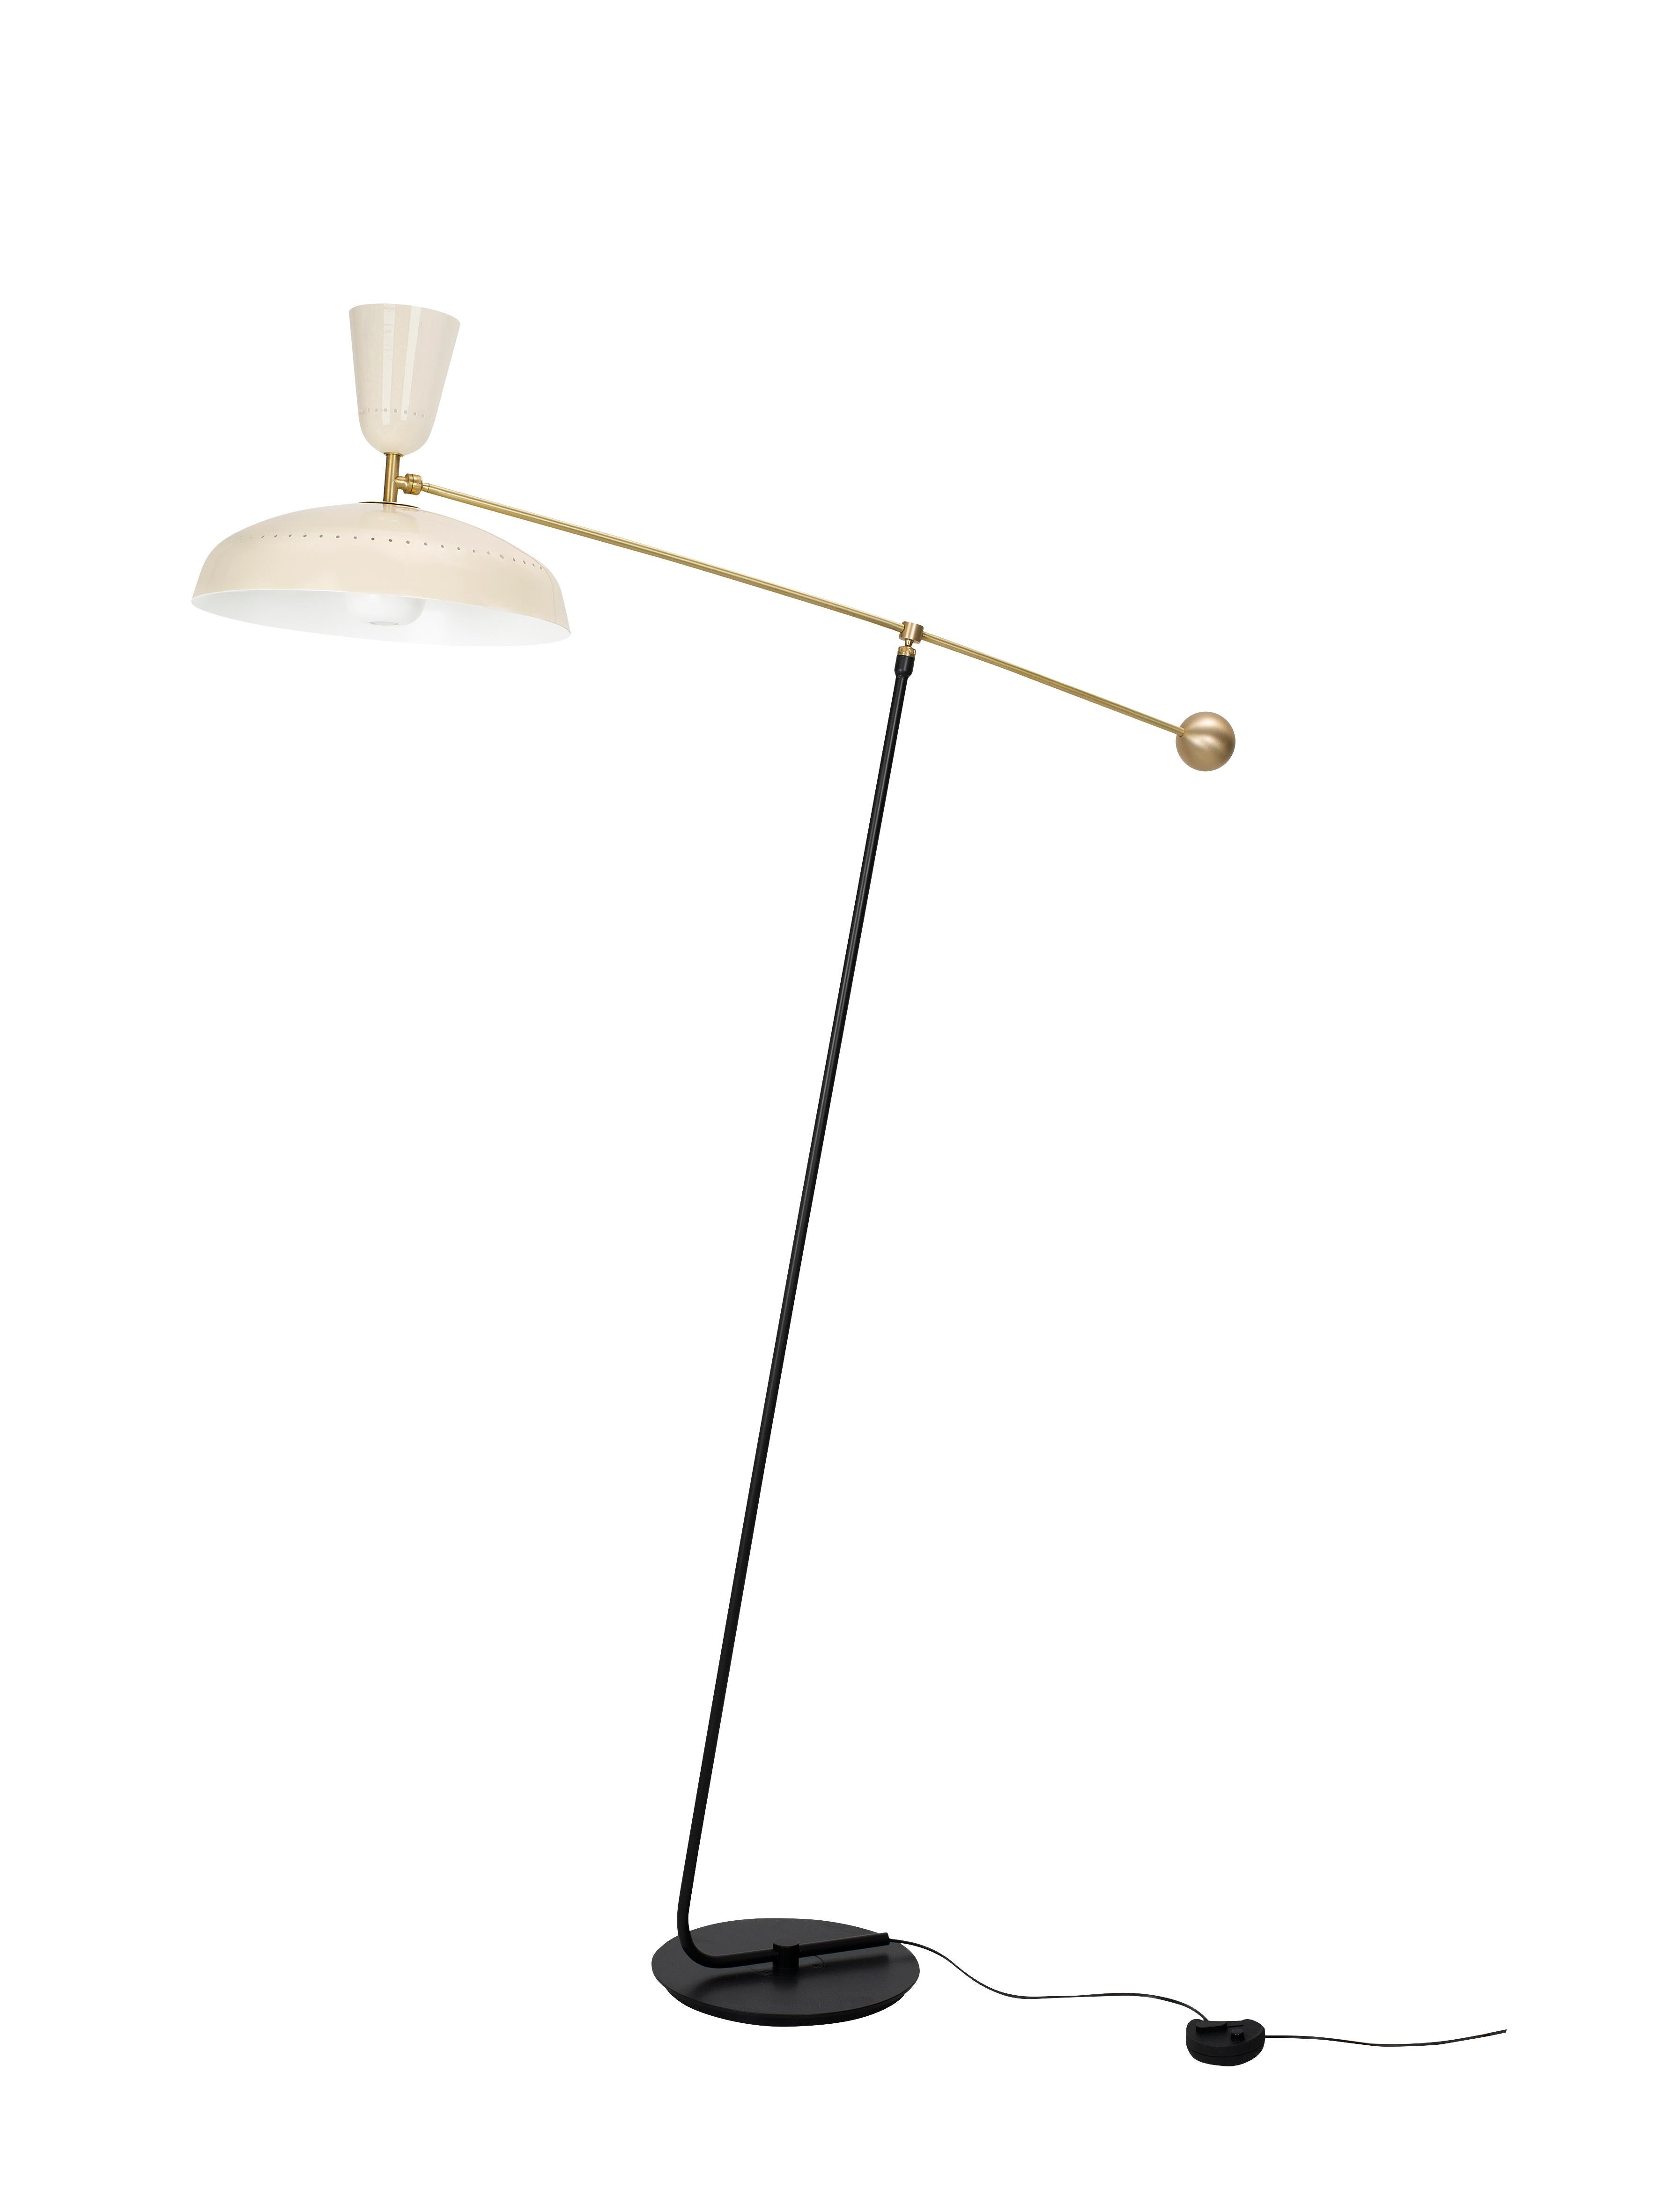 Large Pierre Guariche 'G1' Floor Lamp for Sammode Studio in Black For Sale 5